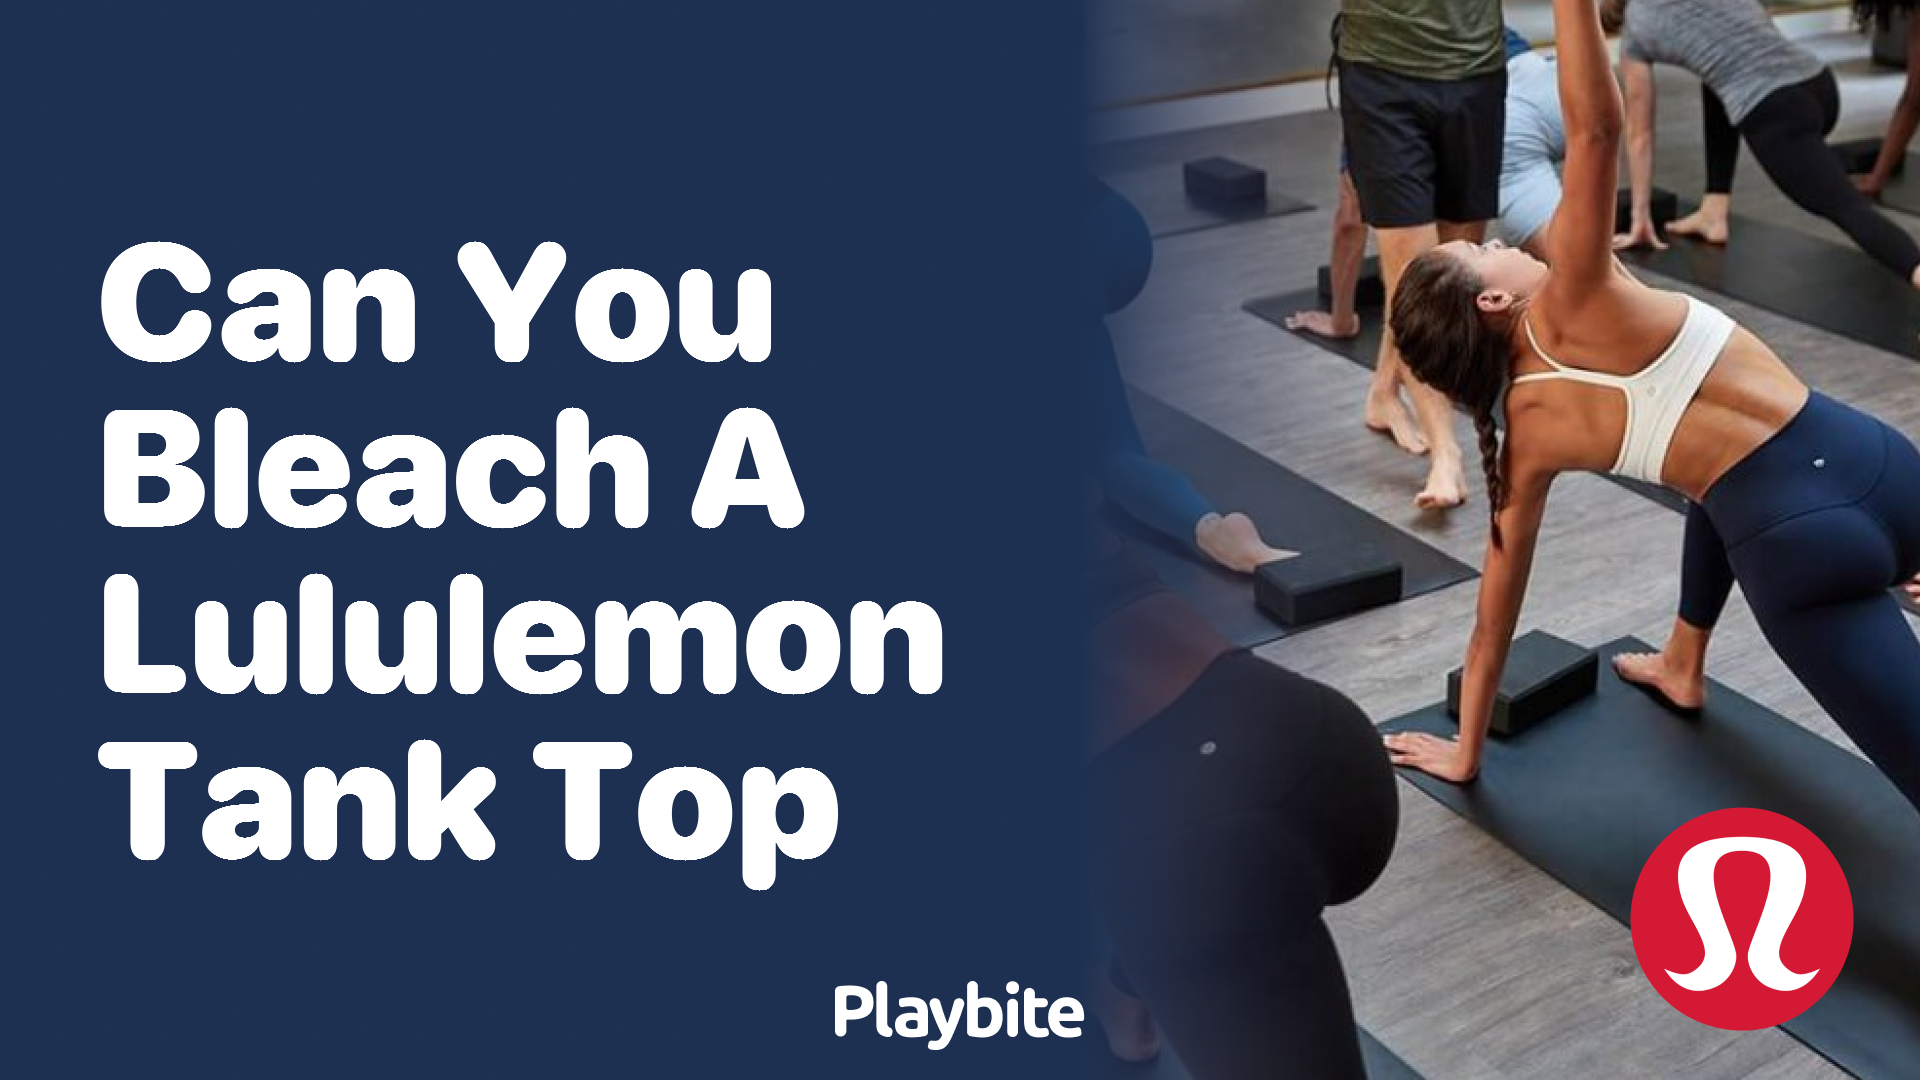 Can You Bleach a Lululemon Tank Top? Find Out Here! - Playbite